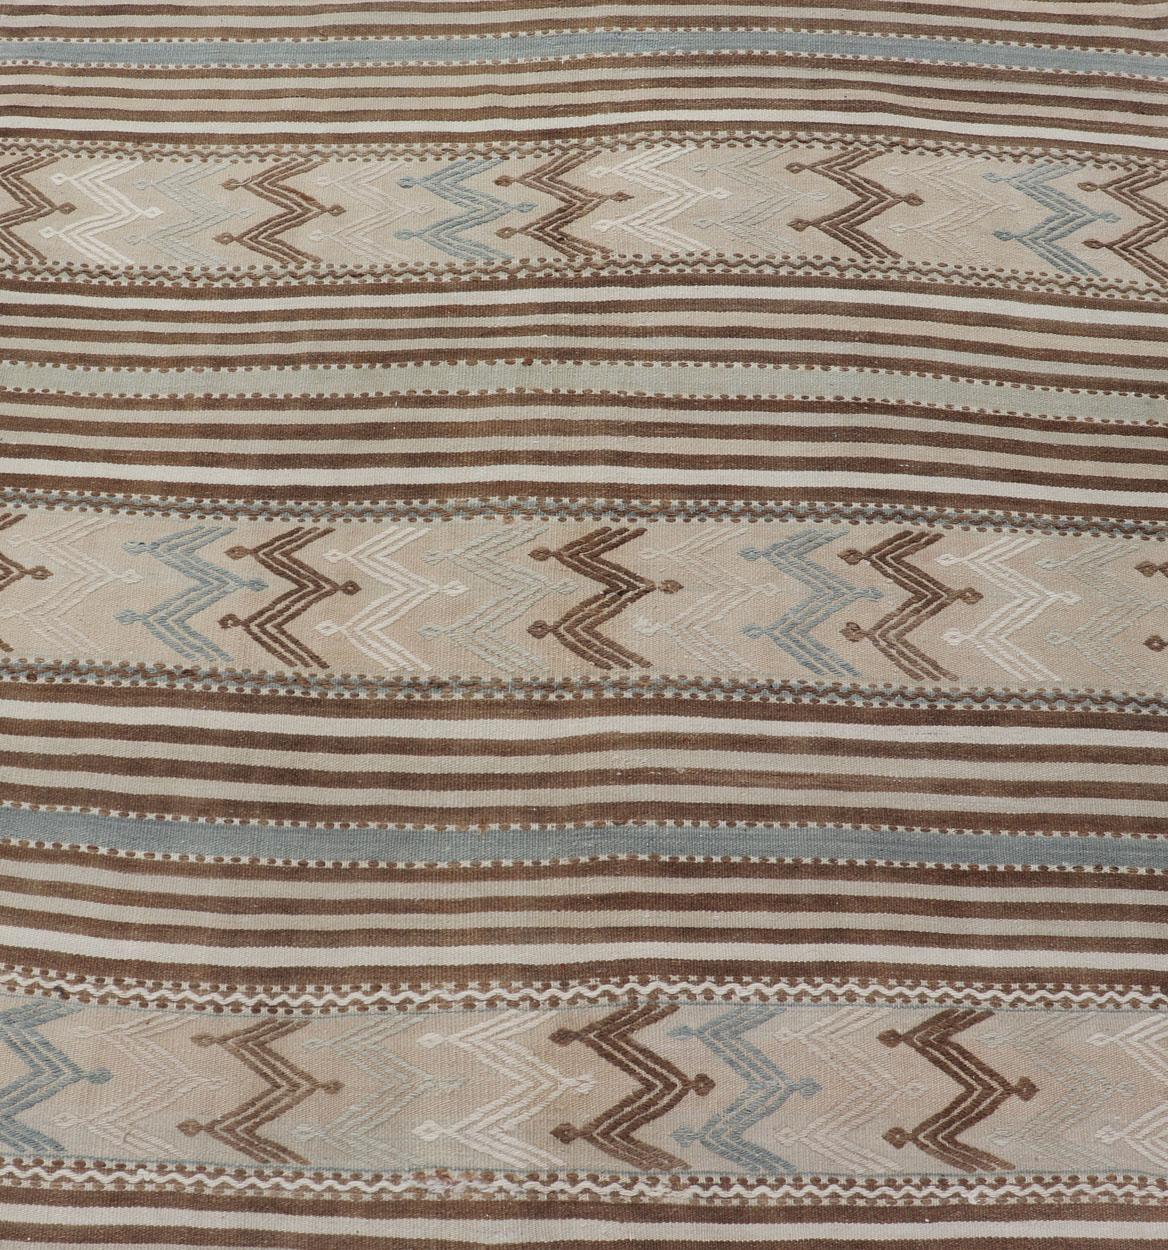 Turkish Hand Woven Flat-Weave Embroideries Kilim in Taupe, Brown, and Lt. Blue  In Excellent Condition For Sale In Atlanta, GA